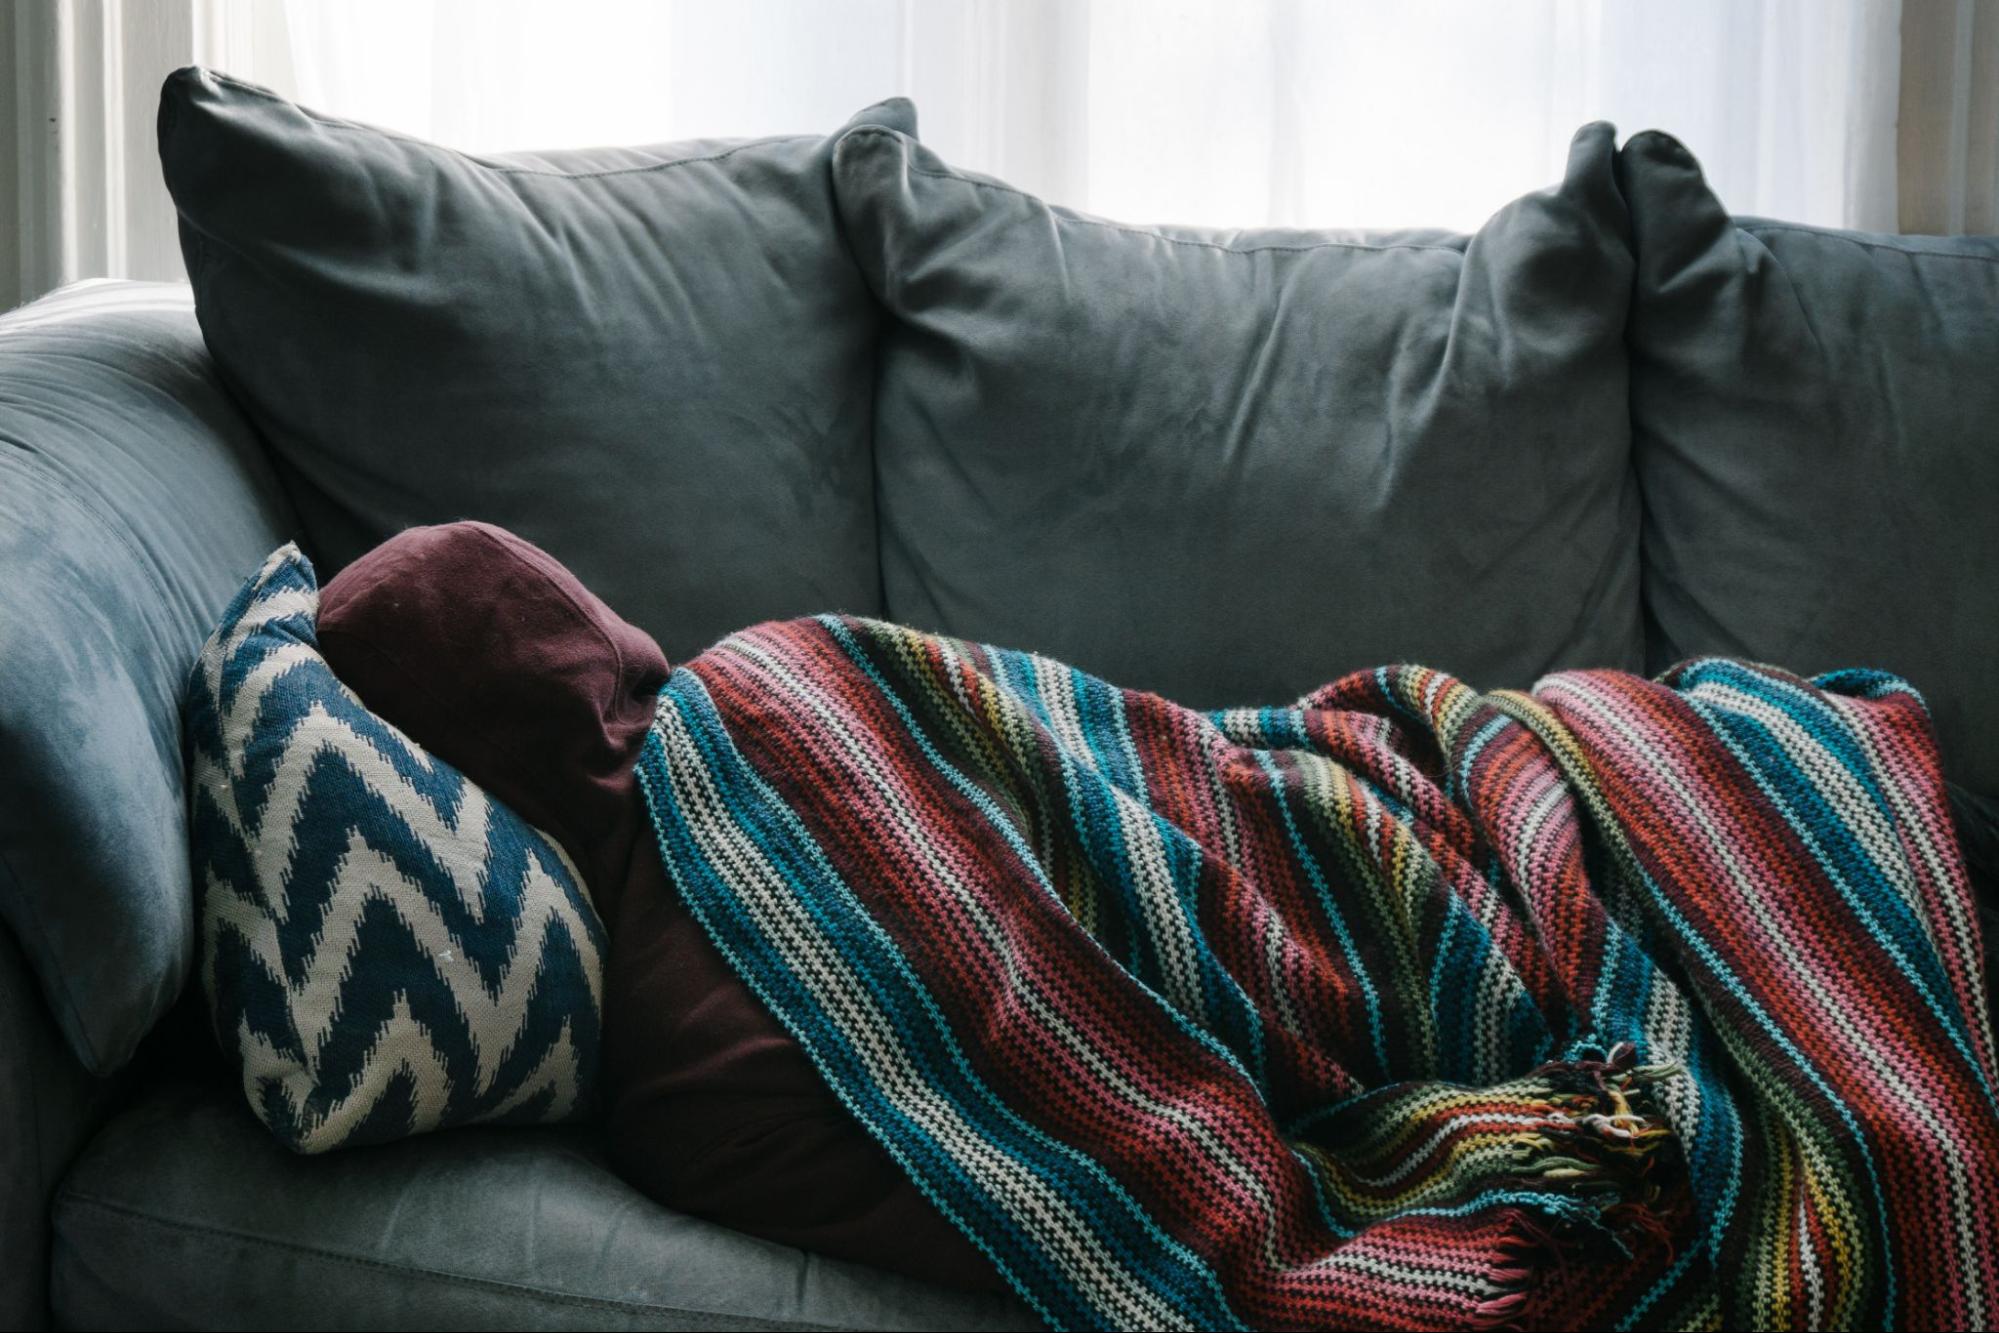 A person wearing a hooded sweatshirt is lying underneath a brightly-striped blanket on a couch.